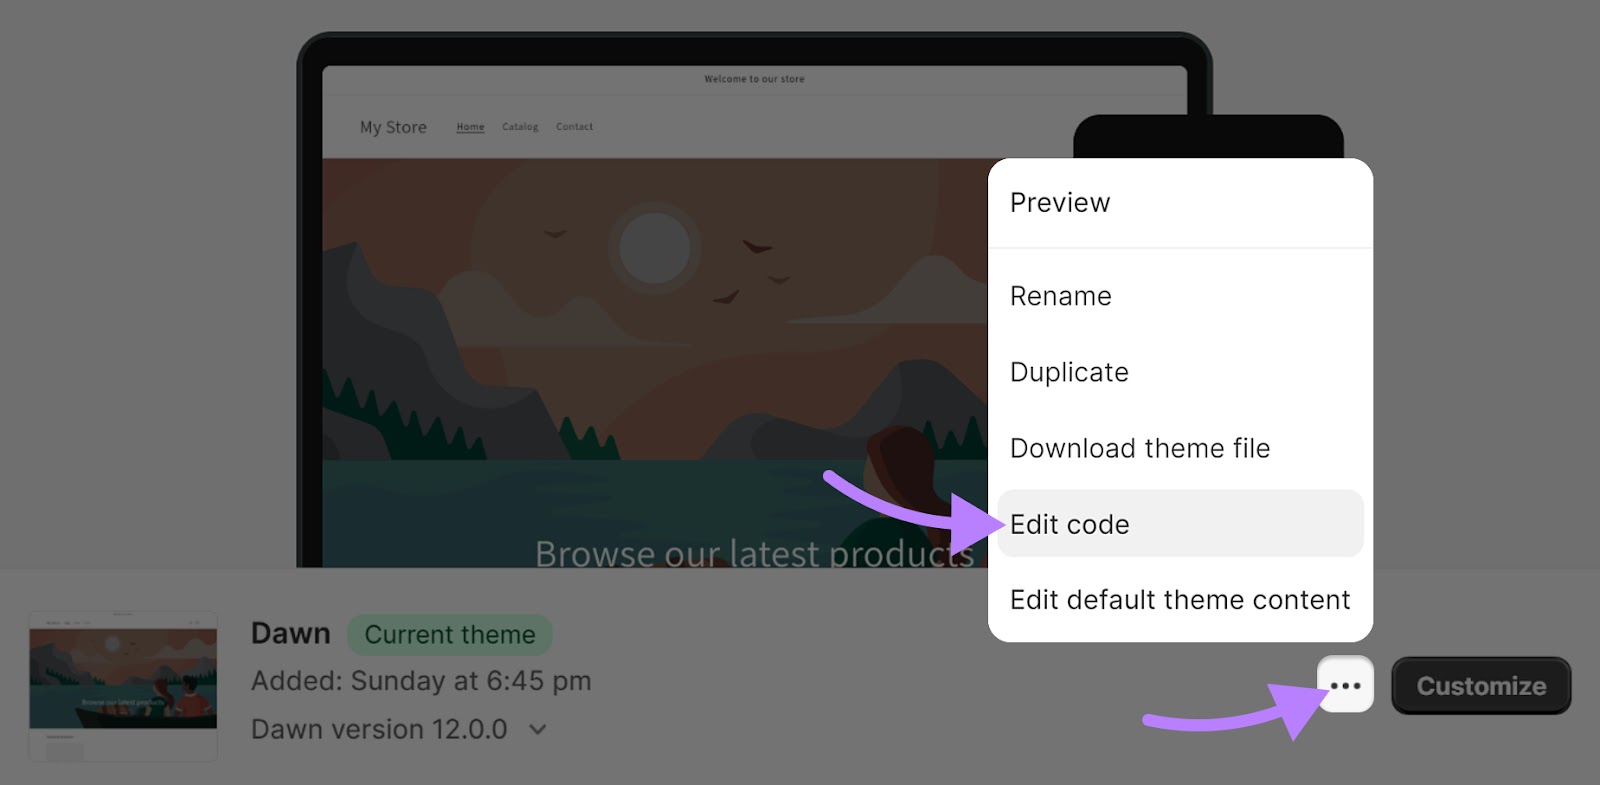 Edit code in your theme modal in Shopify admin dashboard